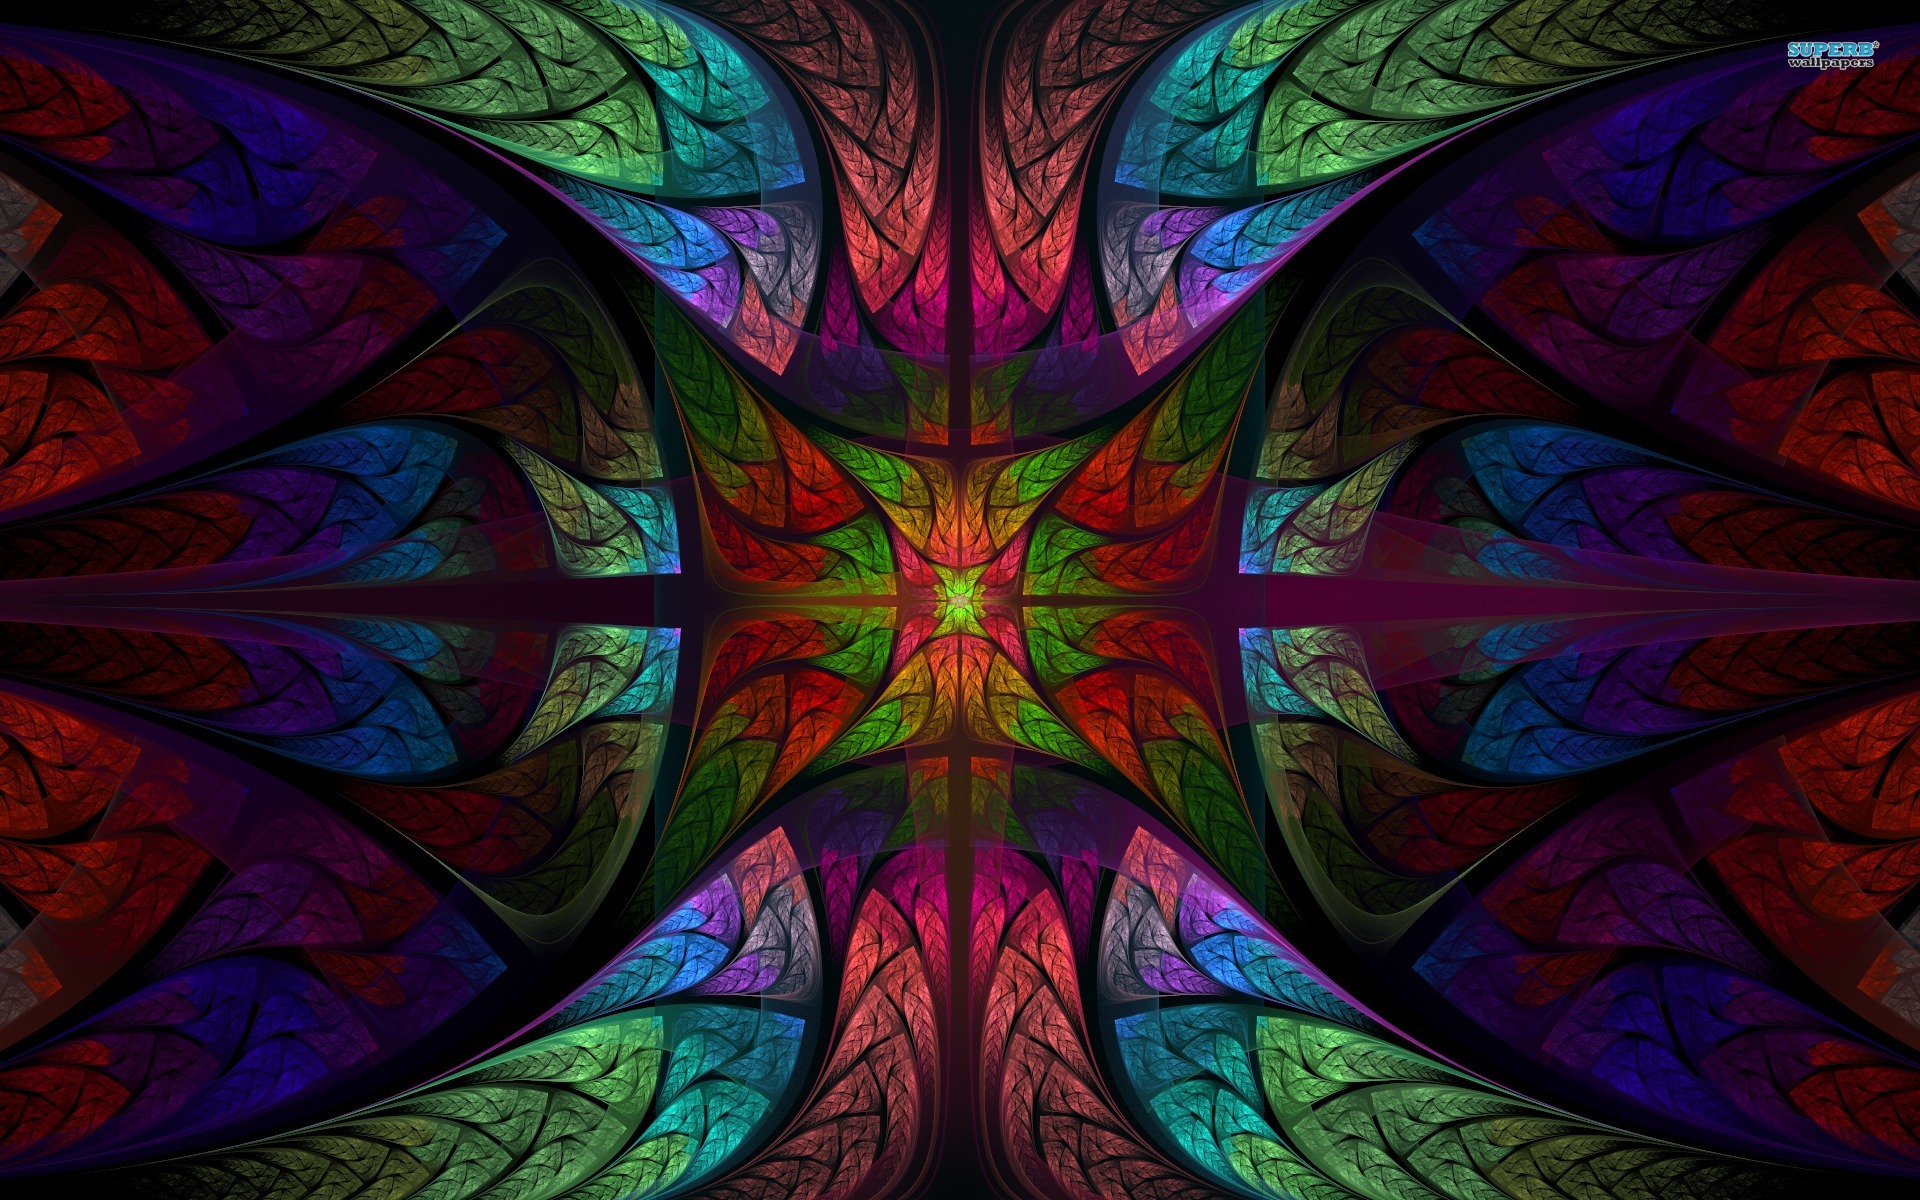 Stained glass backgrounds